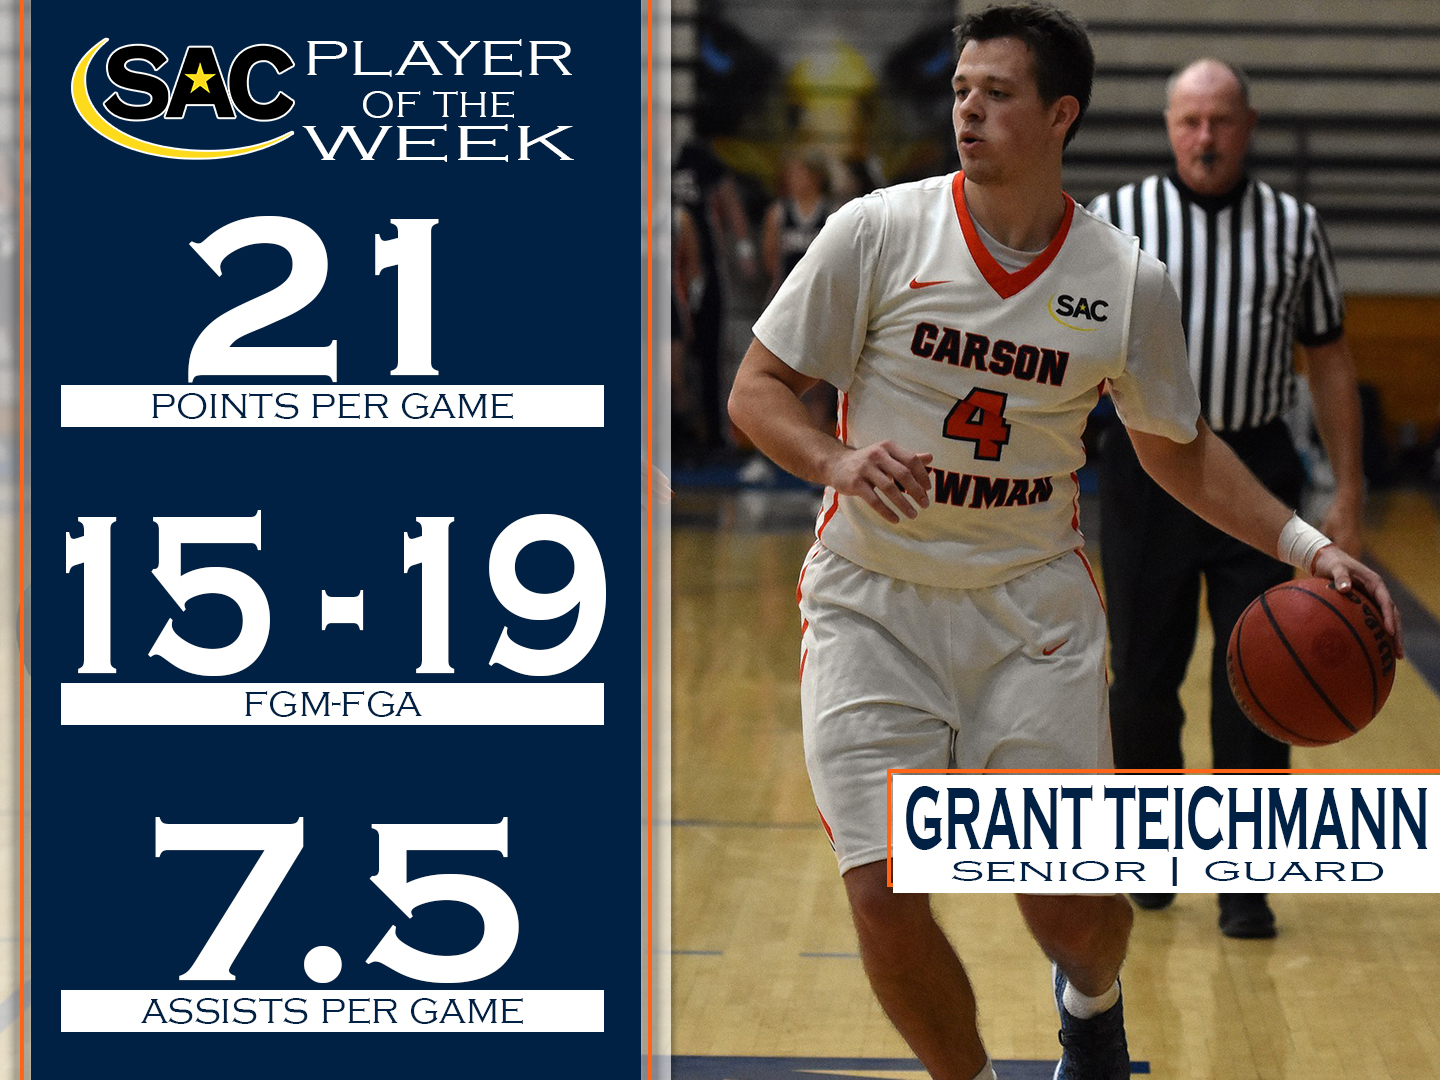 Teichmann lauded as SAC Player of the Week